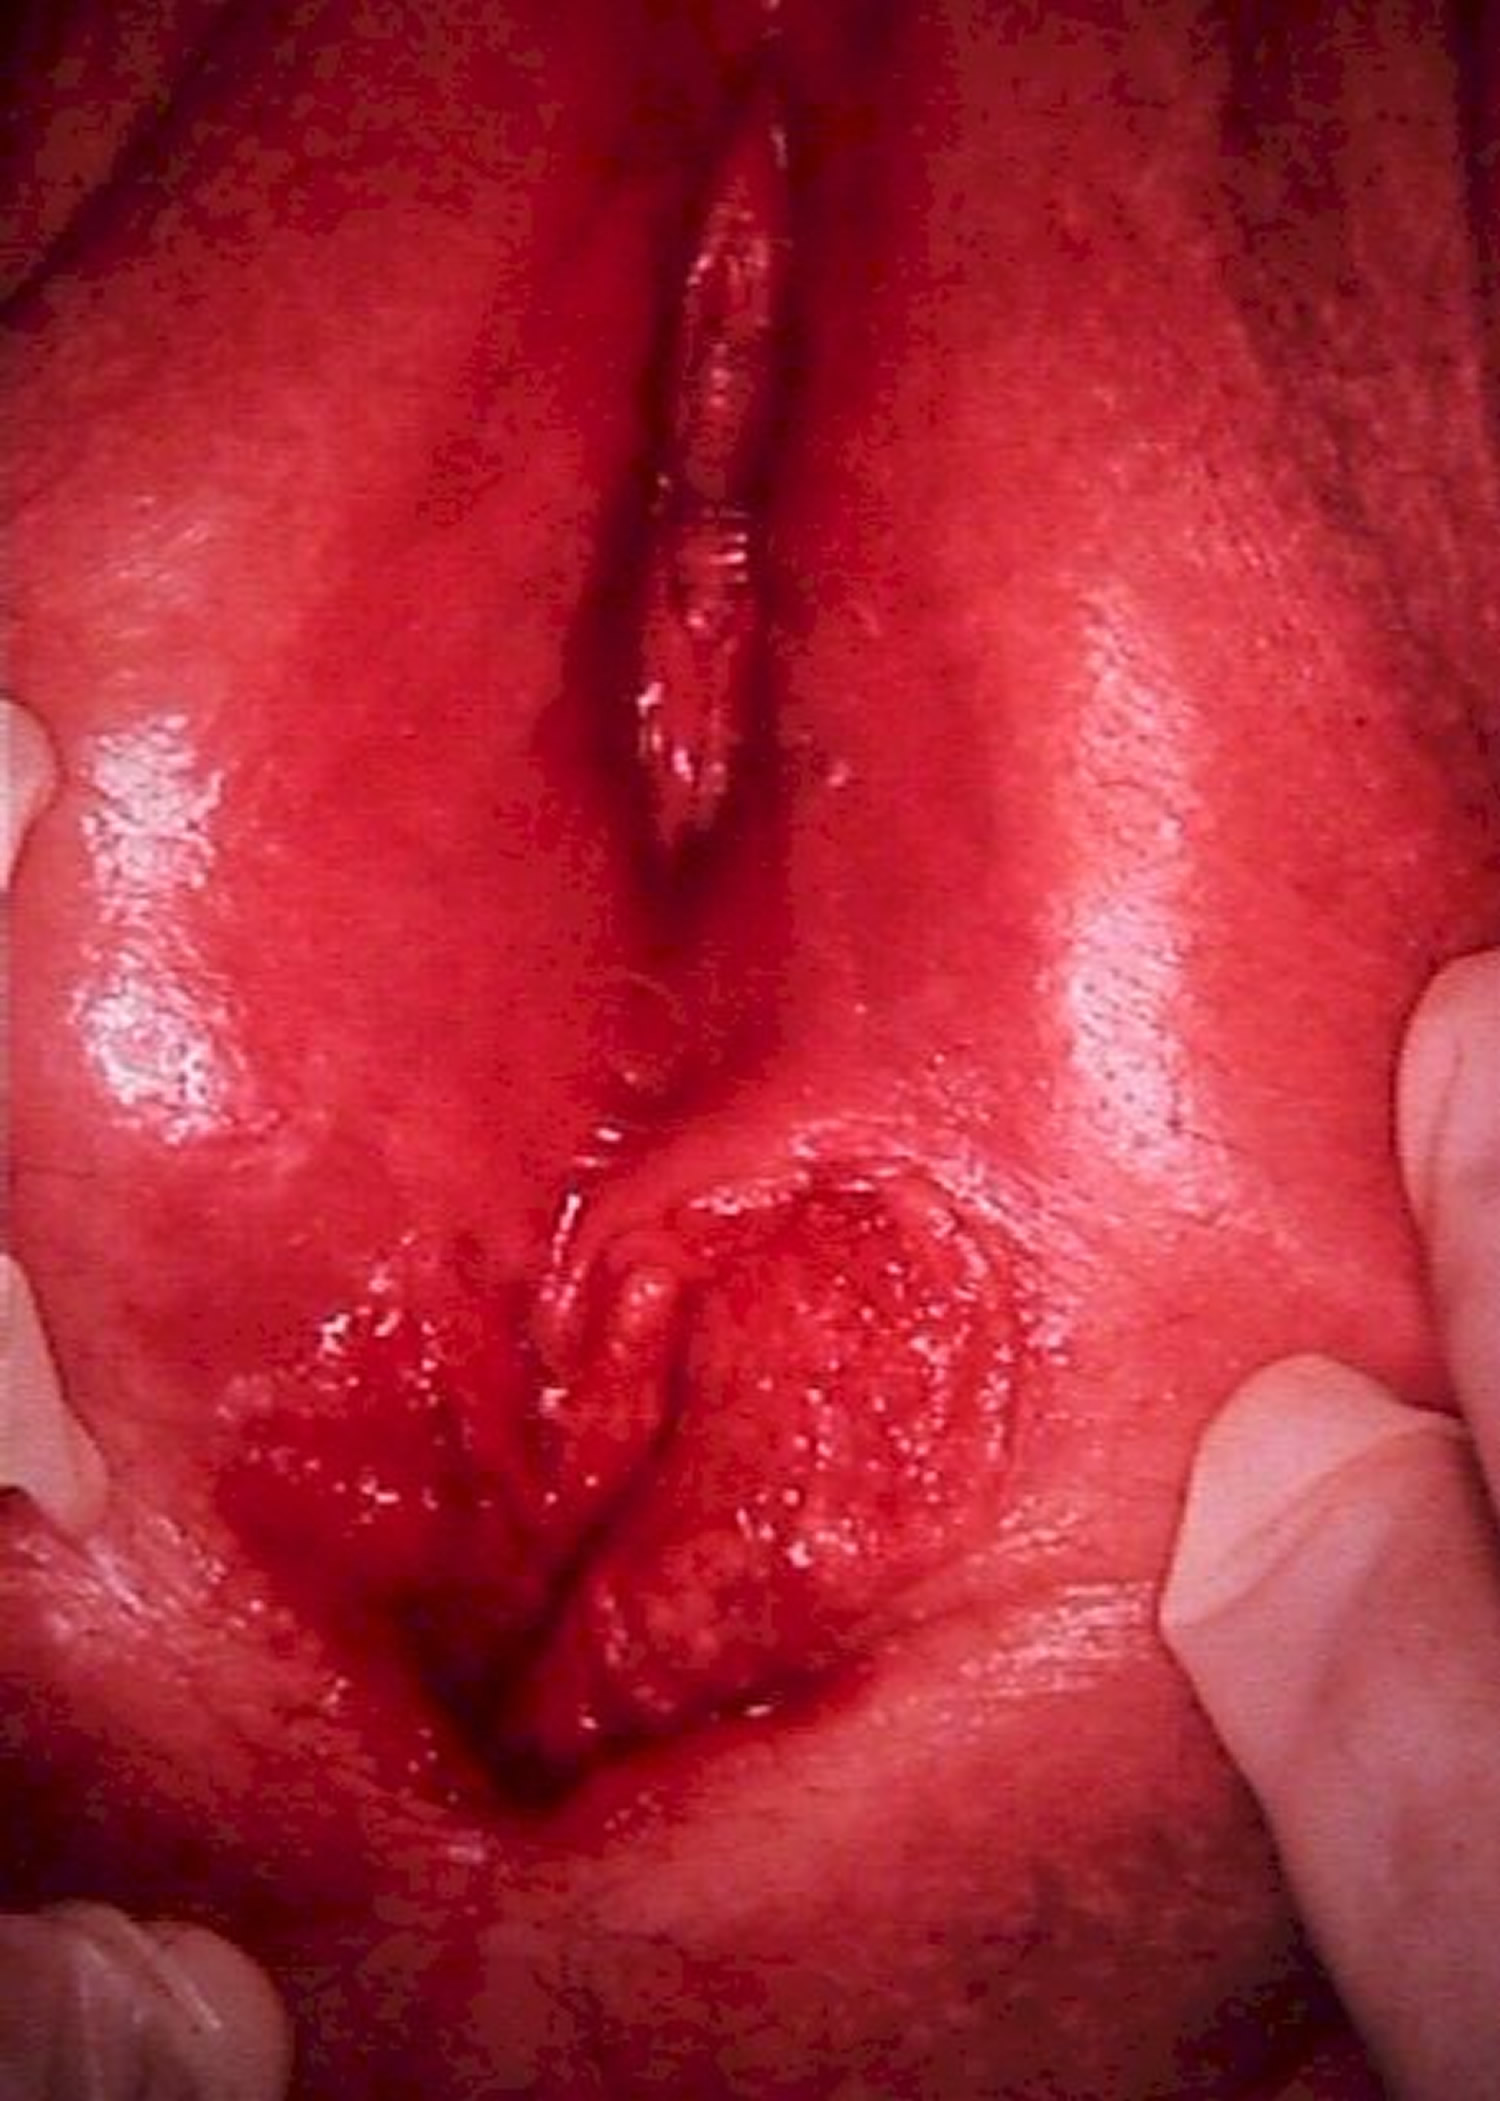 Genital Warts And Hpv In Men